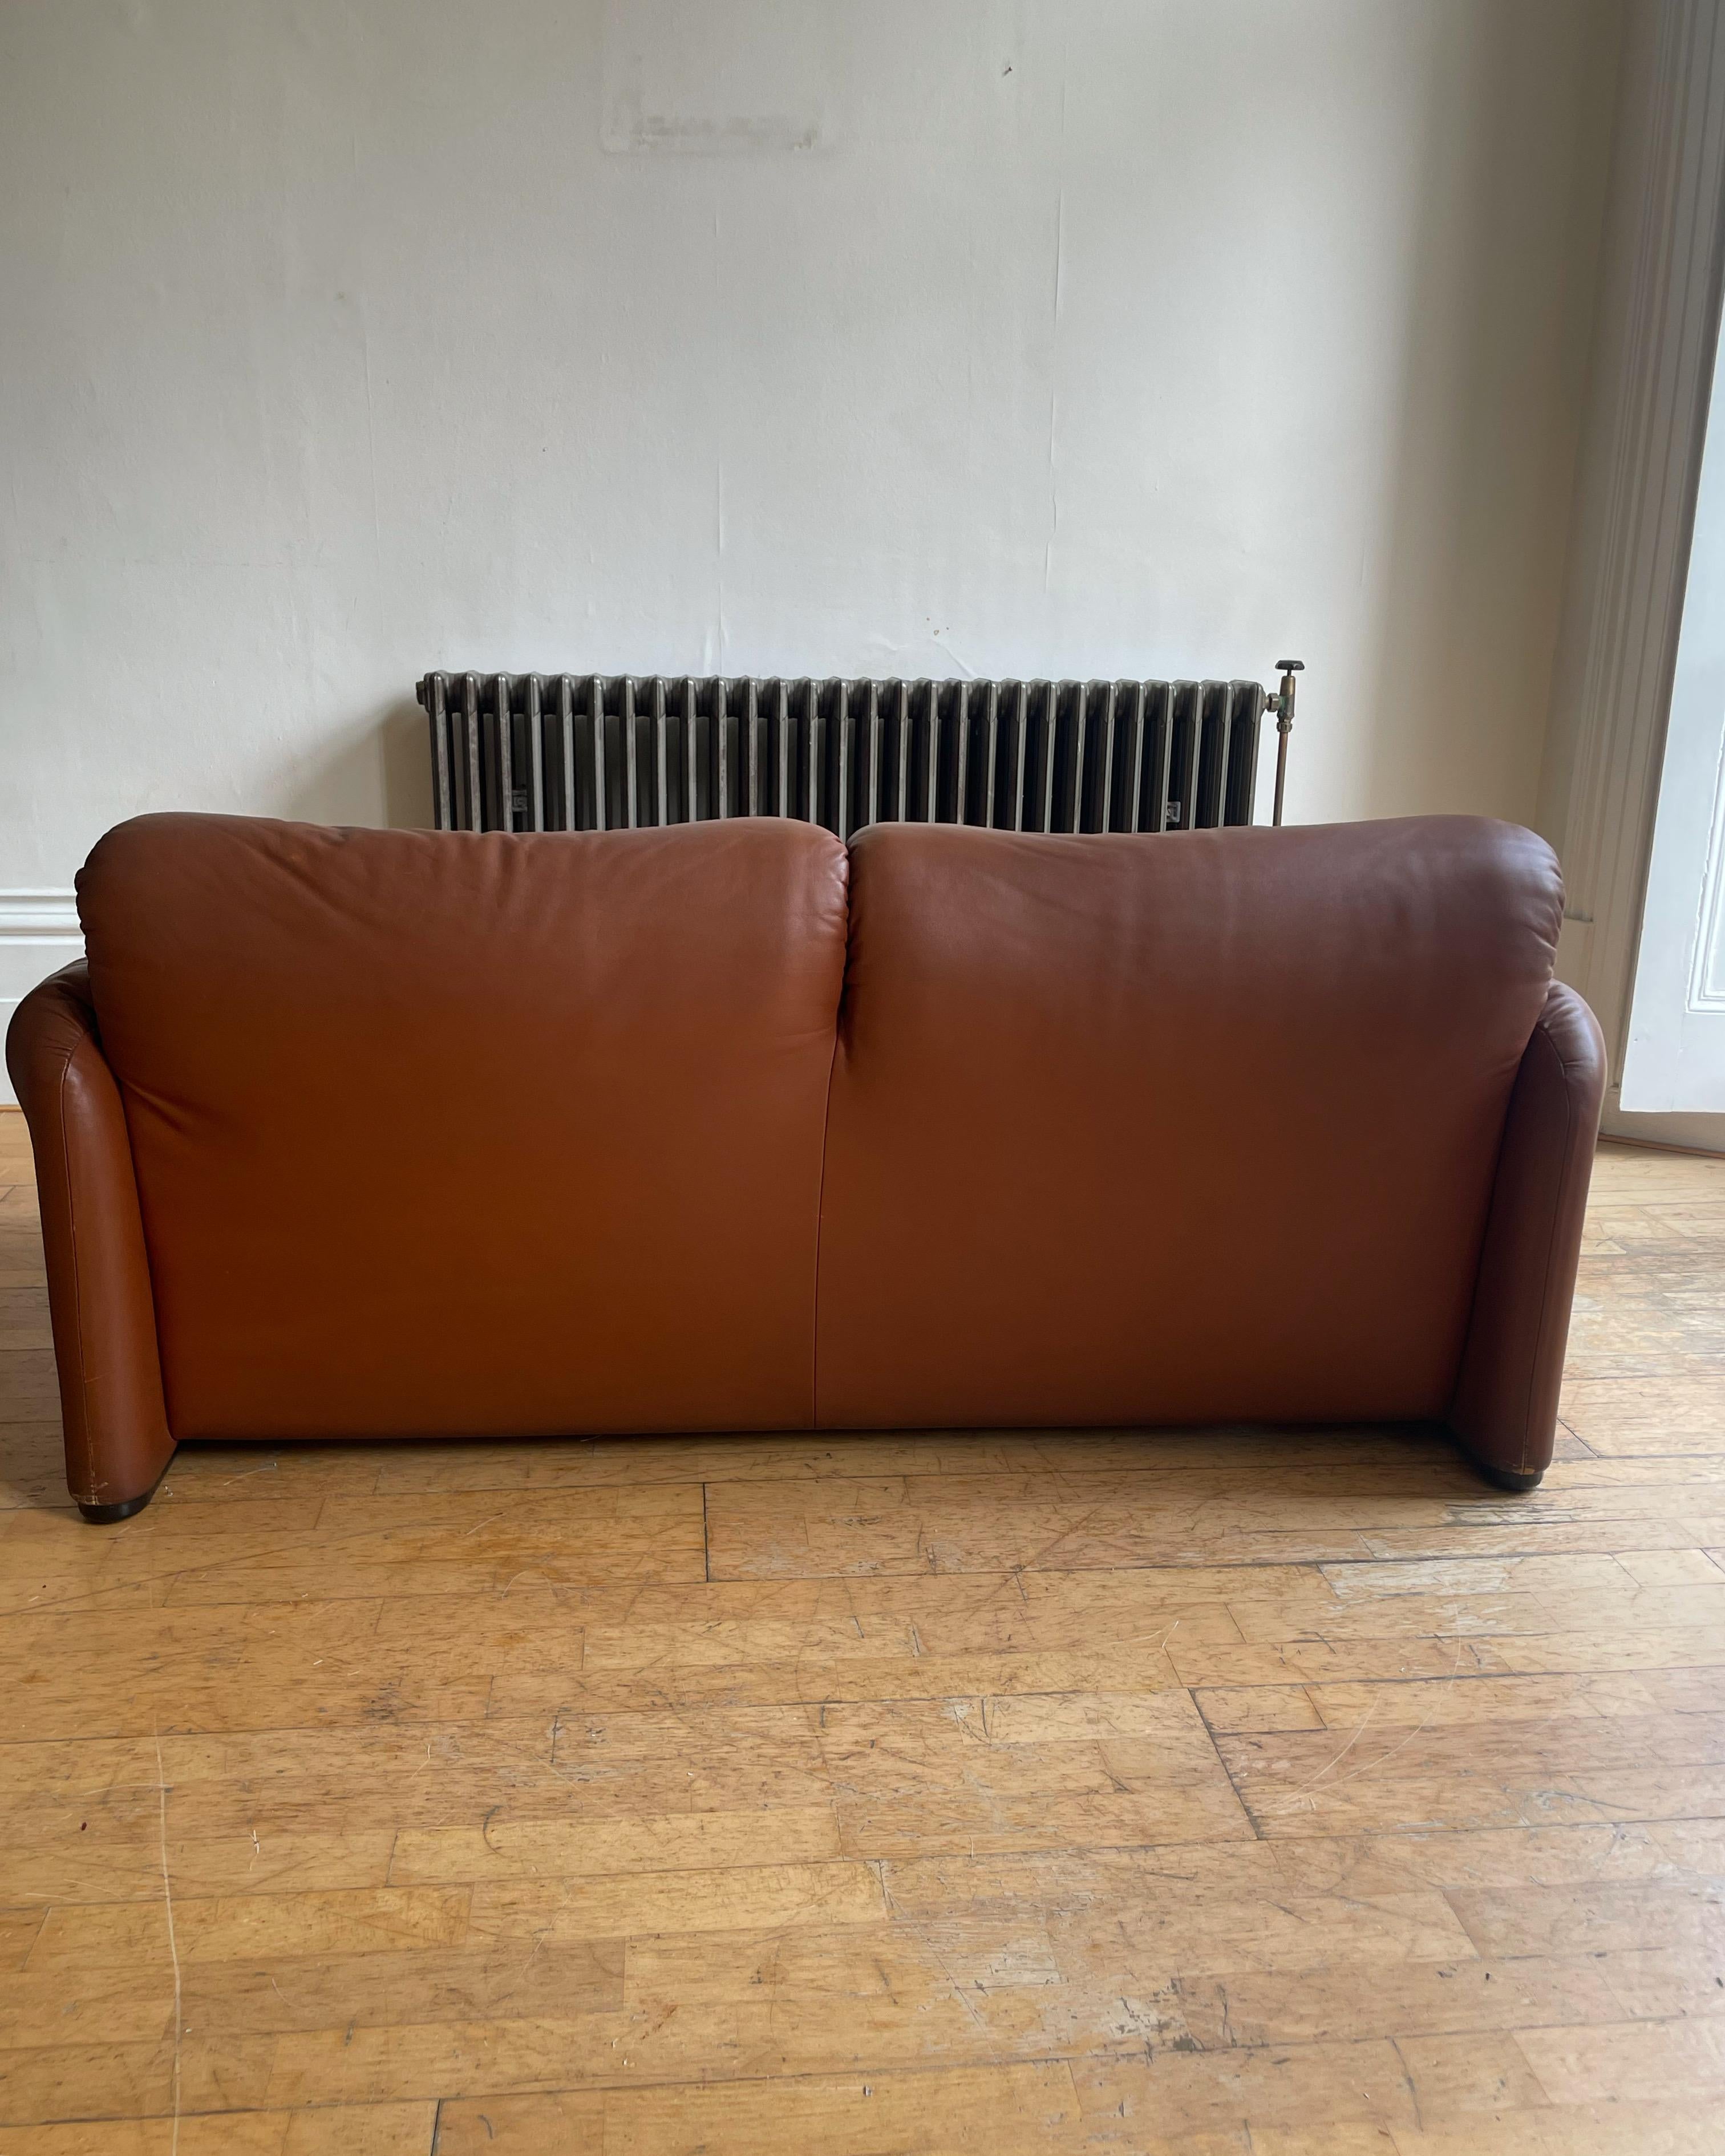 Maralunga Brown Leather Two Seater Sofa by Vico Magistretti, Vintage 2